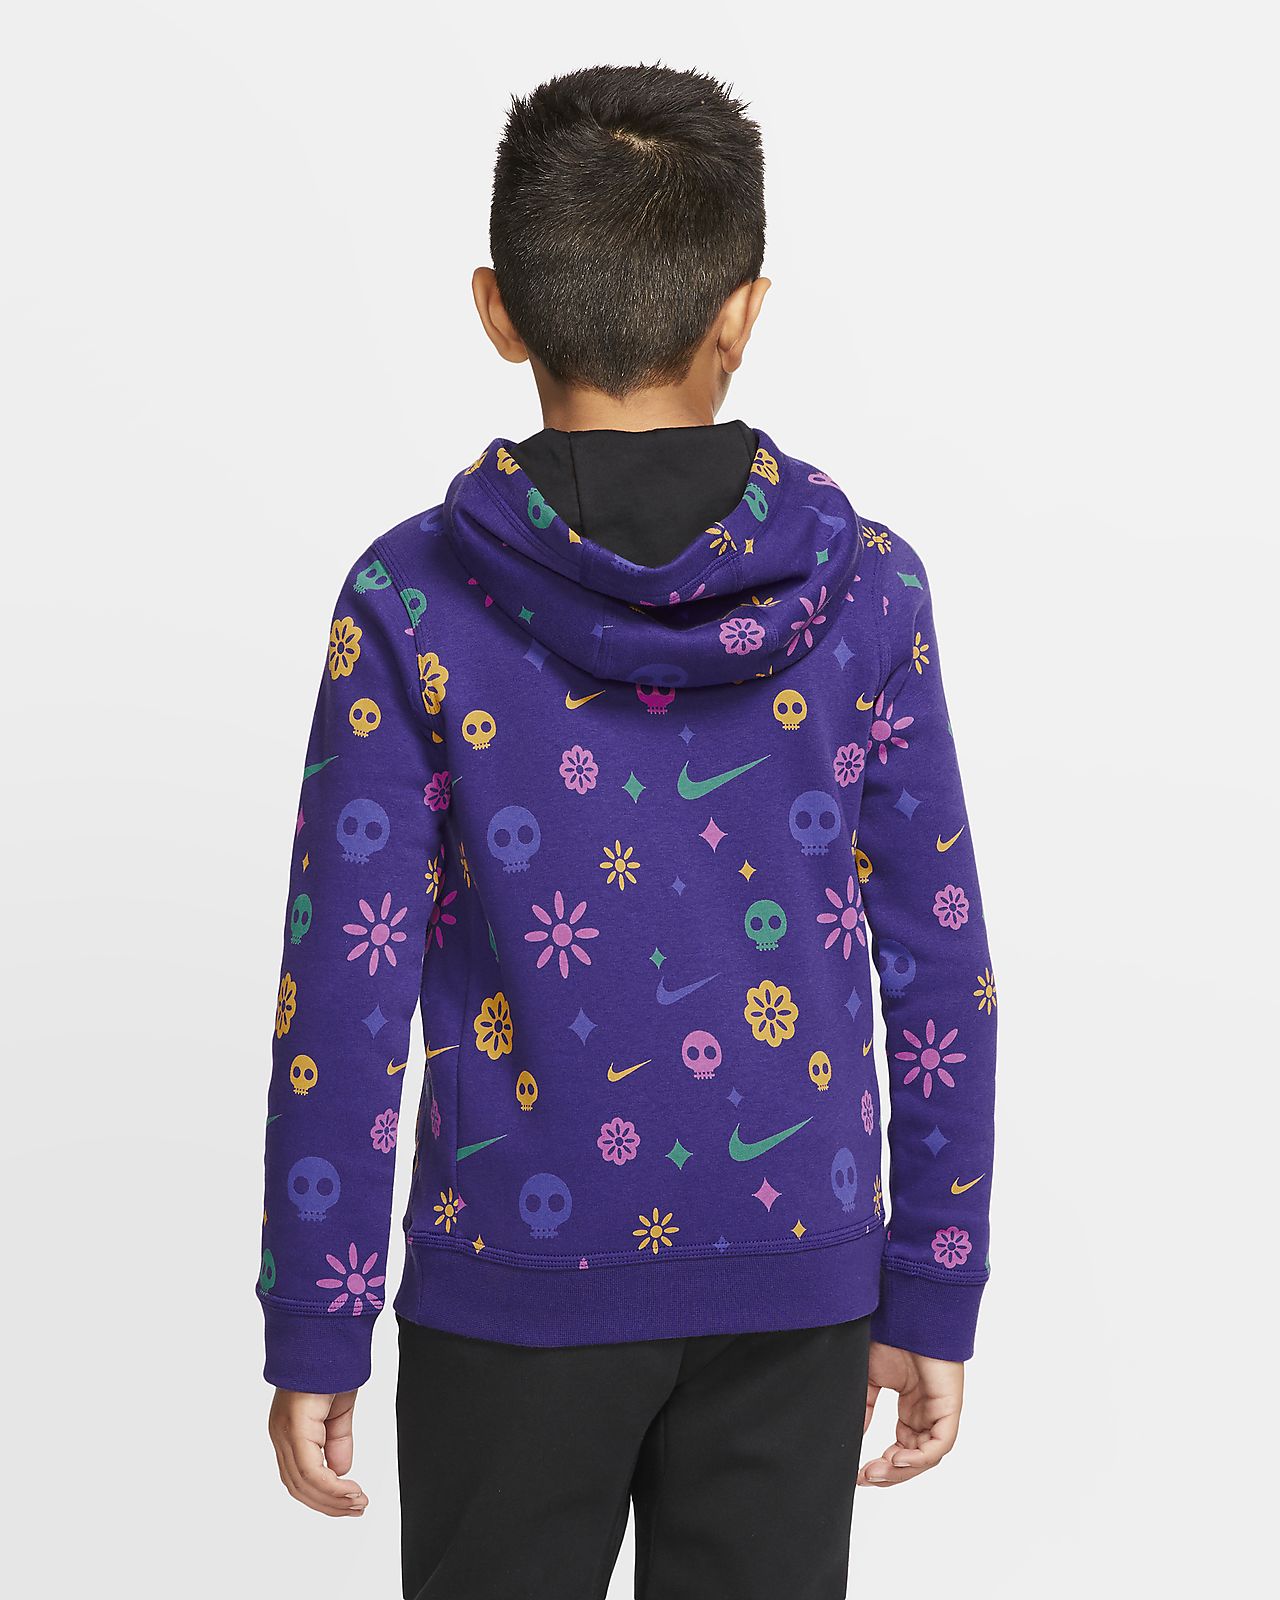 nike pullover hoodie youth